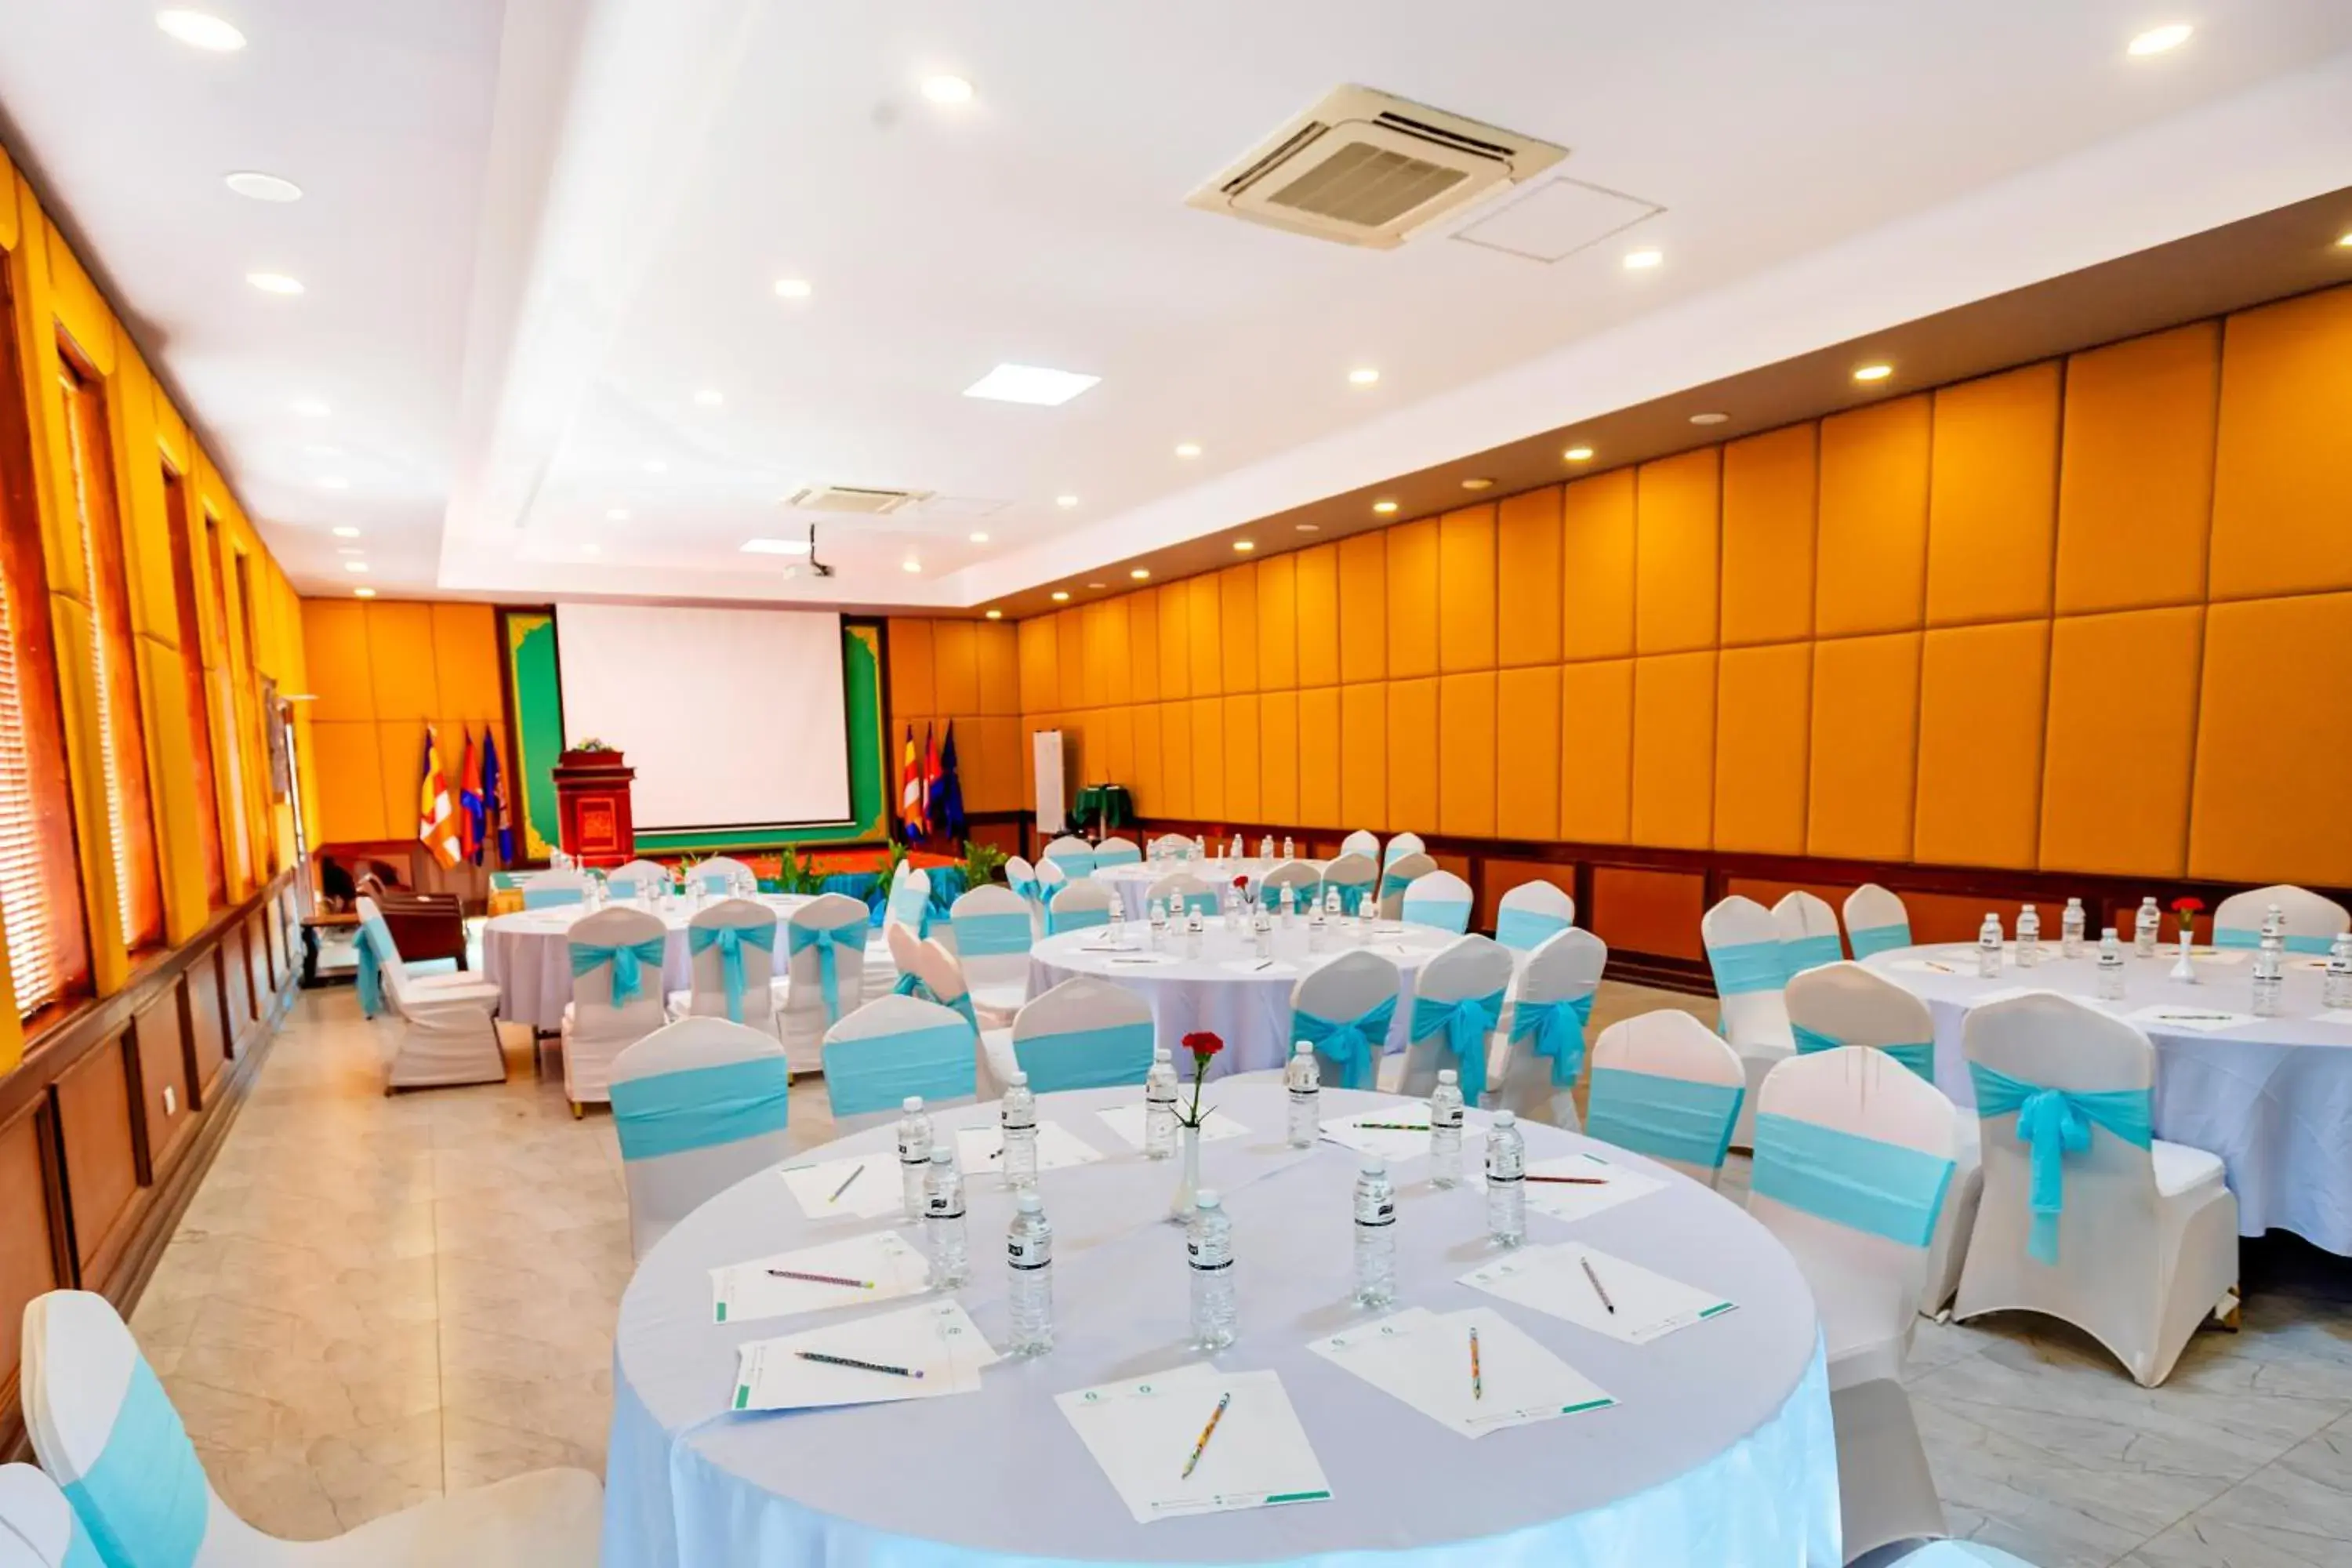 Meeting/conference room, Banquet Facilities in Green Amazon Residence Hotel